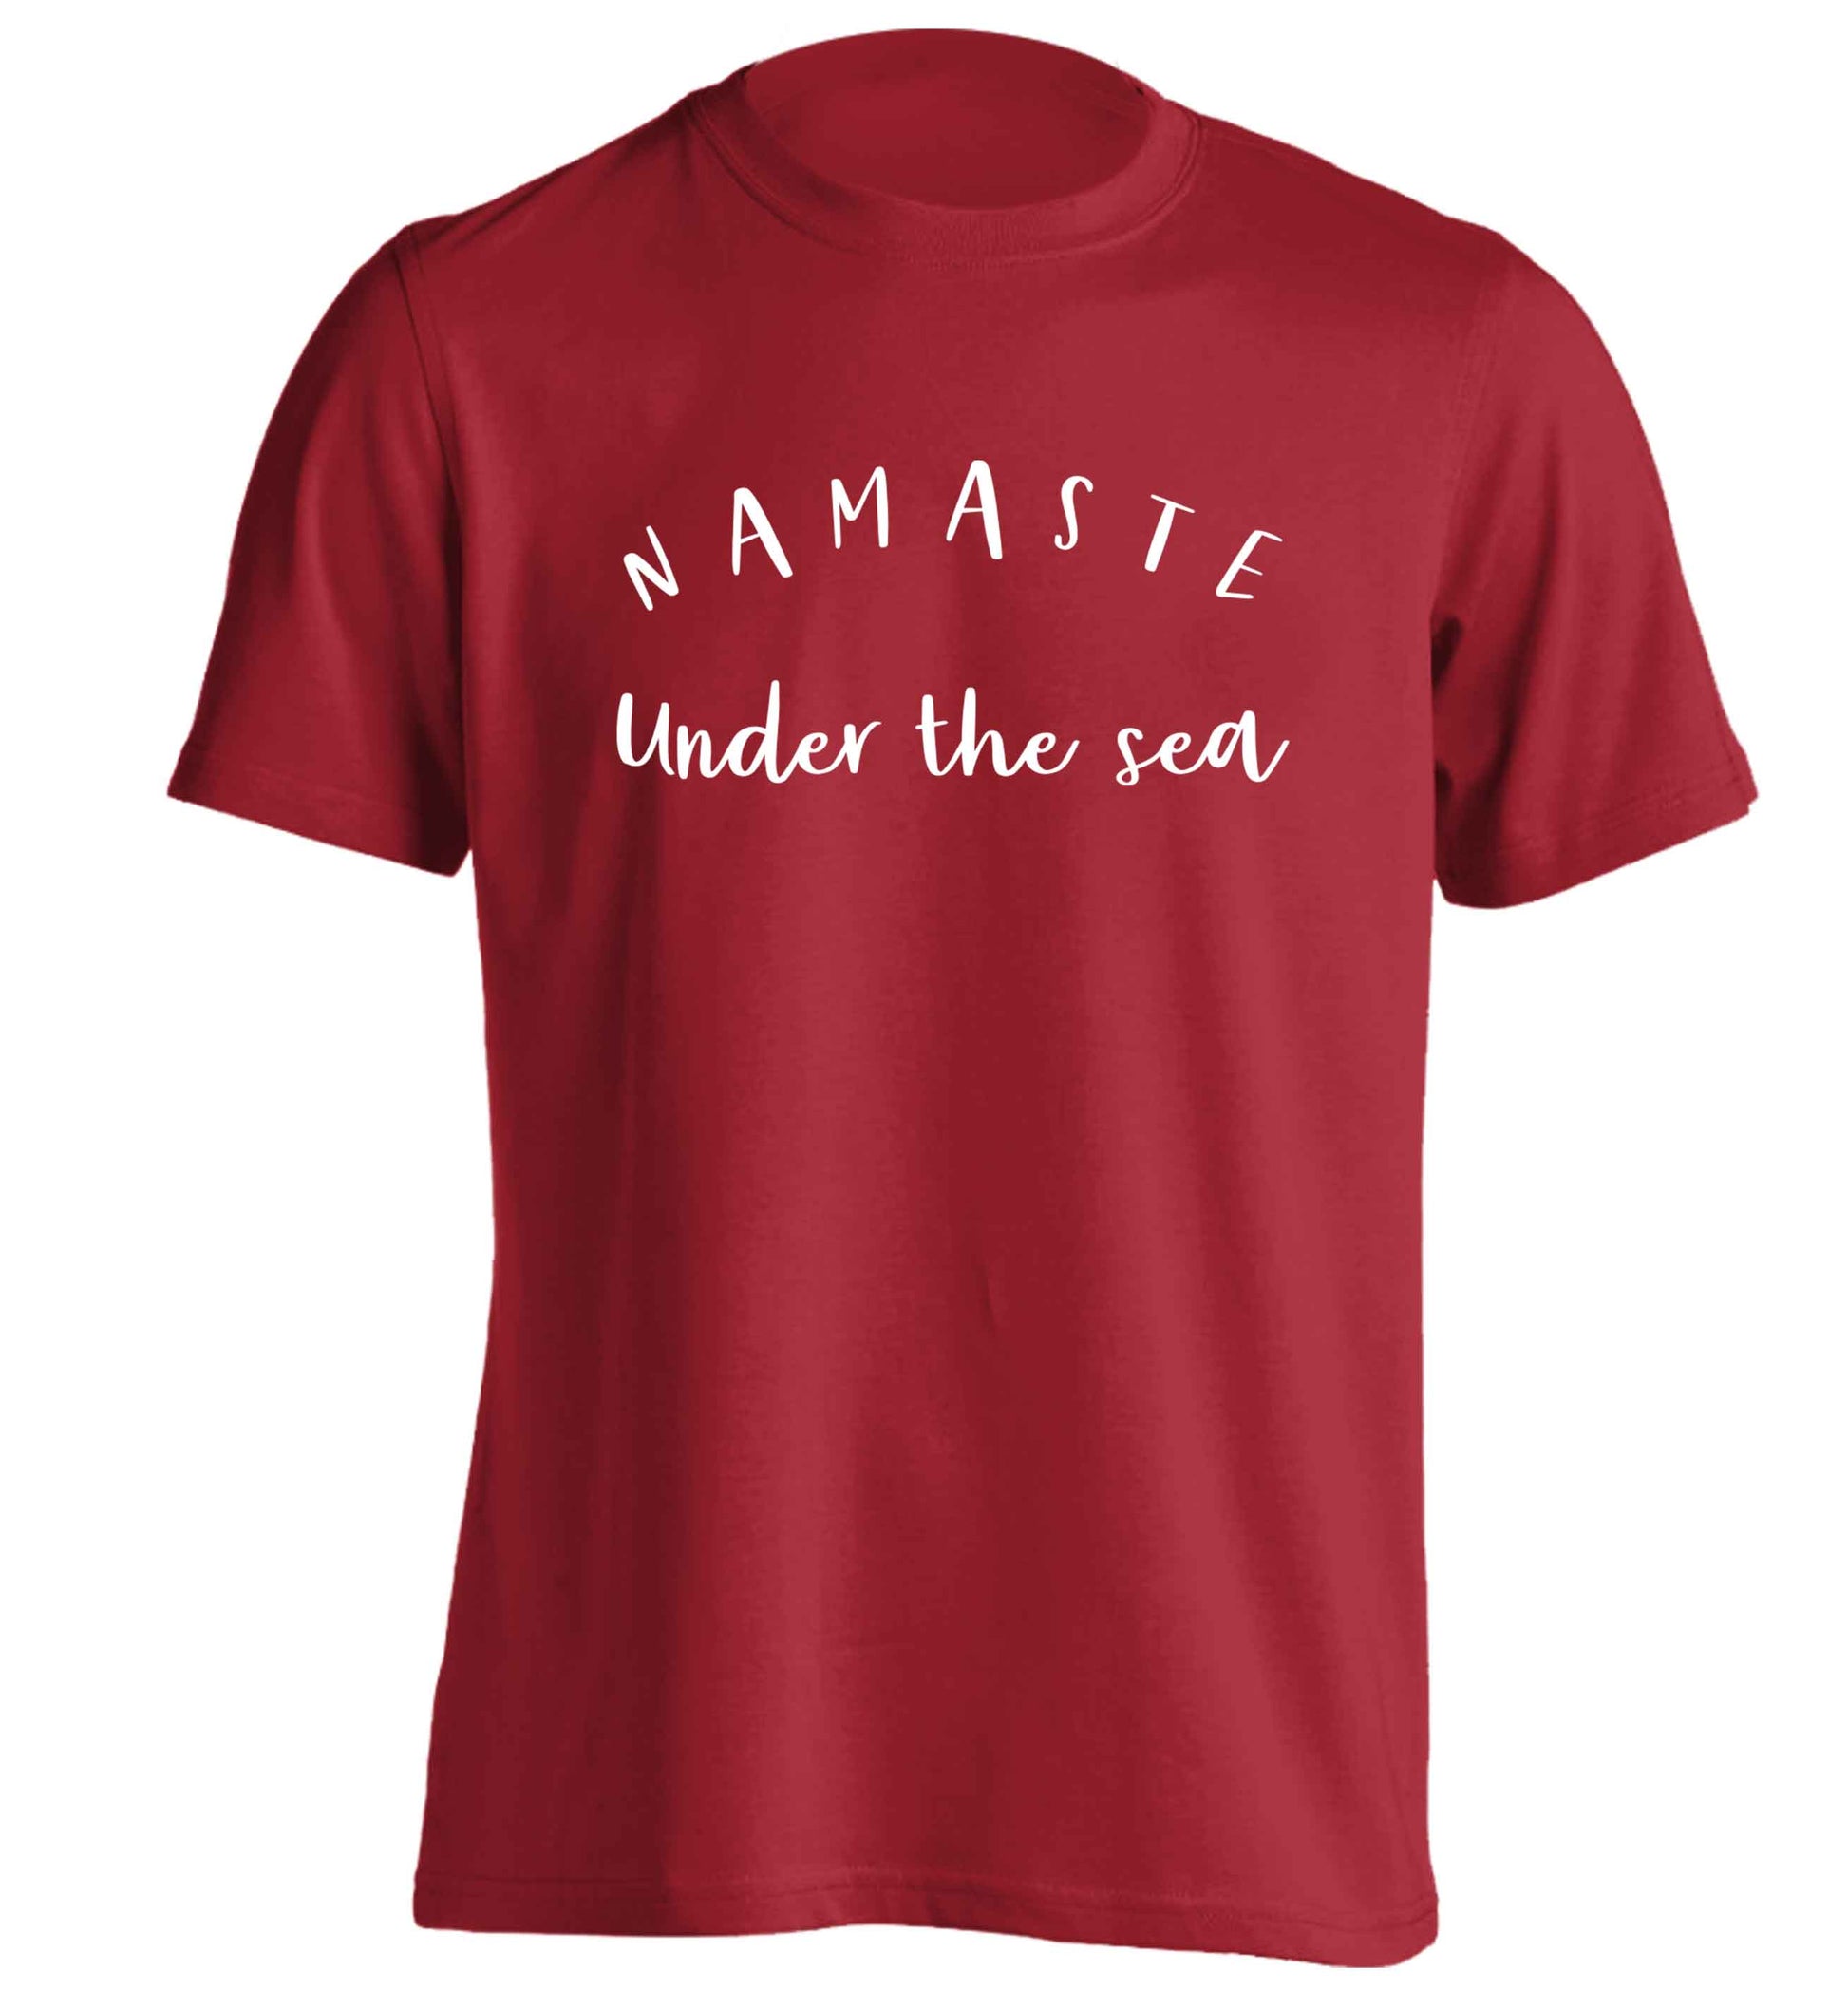 Namaste under the water adults unisex red Tshirt 2XL